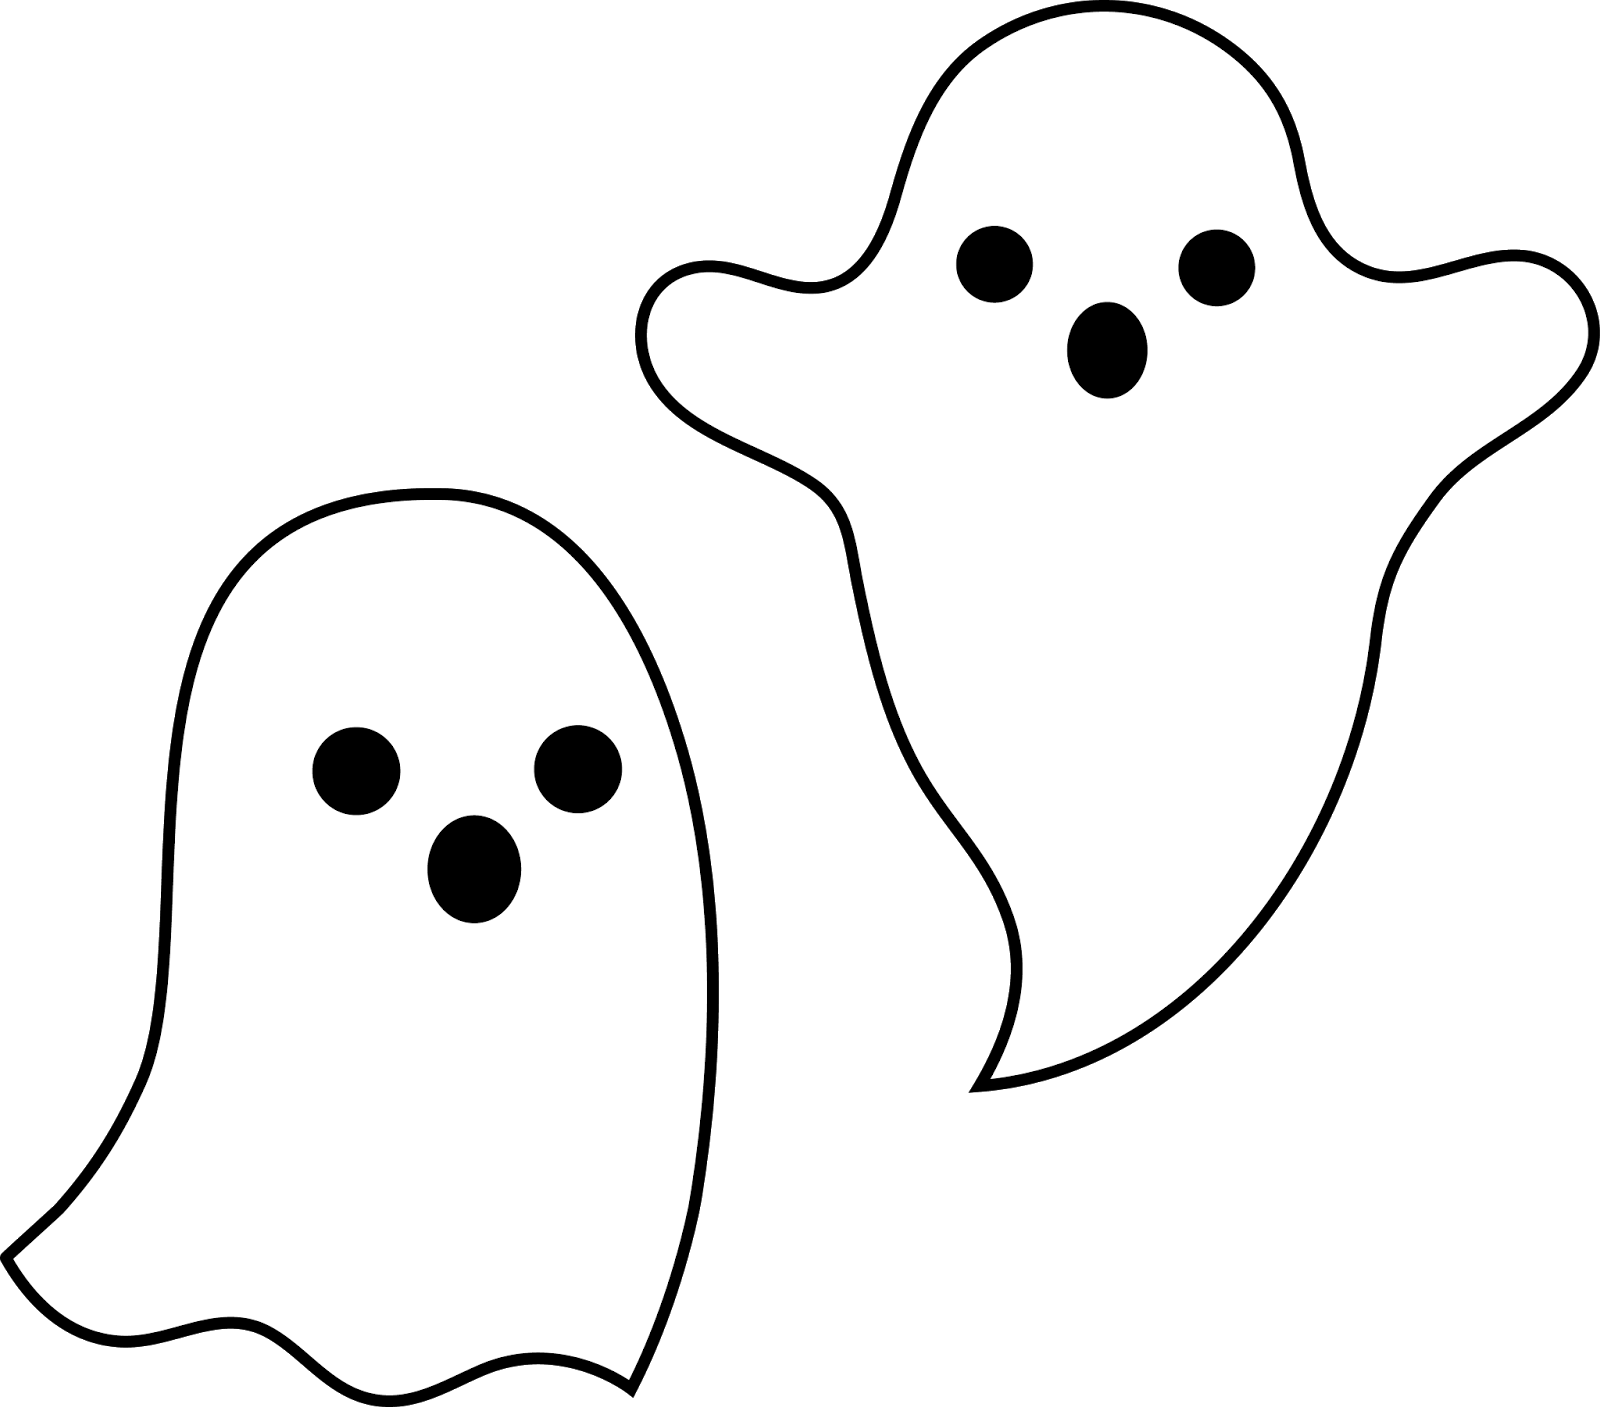 Hands clipart ghost. Silhouette at getdrawings com